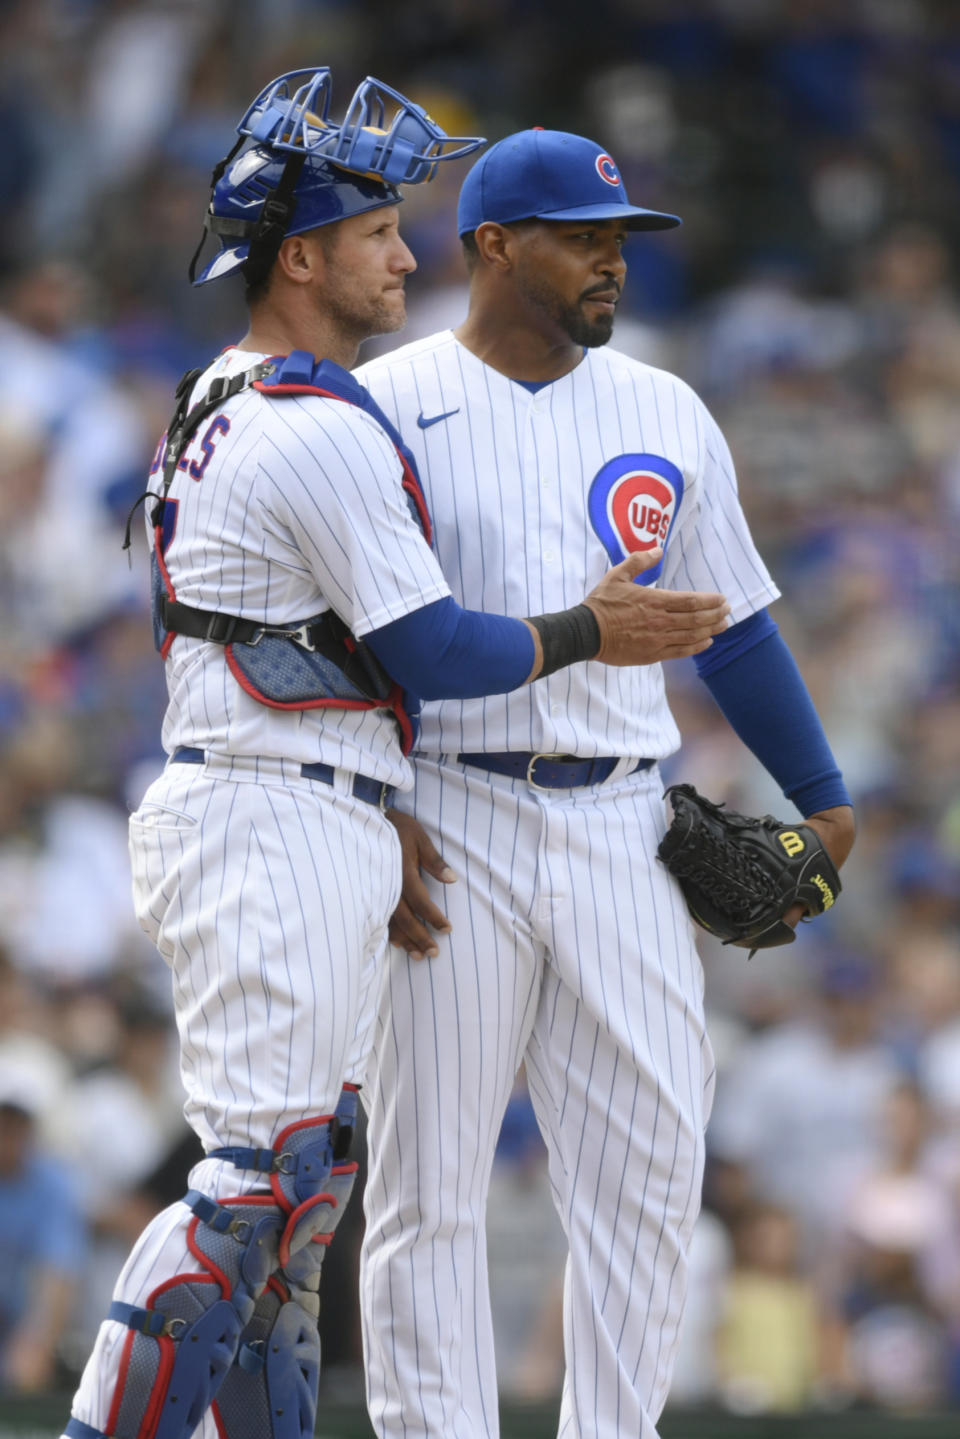 Chicago Cubs closing pitcher Mychal Givens, right, celebrates with catcher Yan Gomes, left, after defeating the Pittsburgh Pirates 4-2 in a baseball game Tuesday, July 26, 2022, in Chicago. (AP Photo/Paul Beaty)